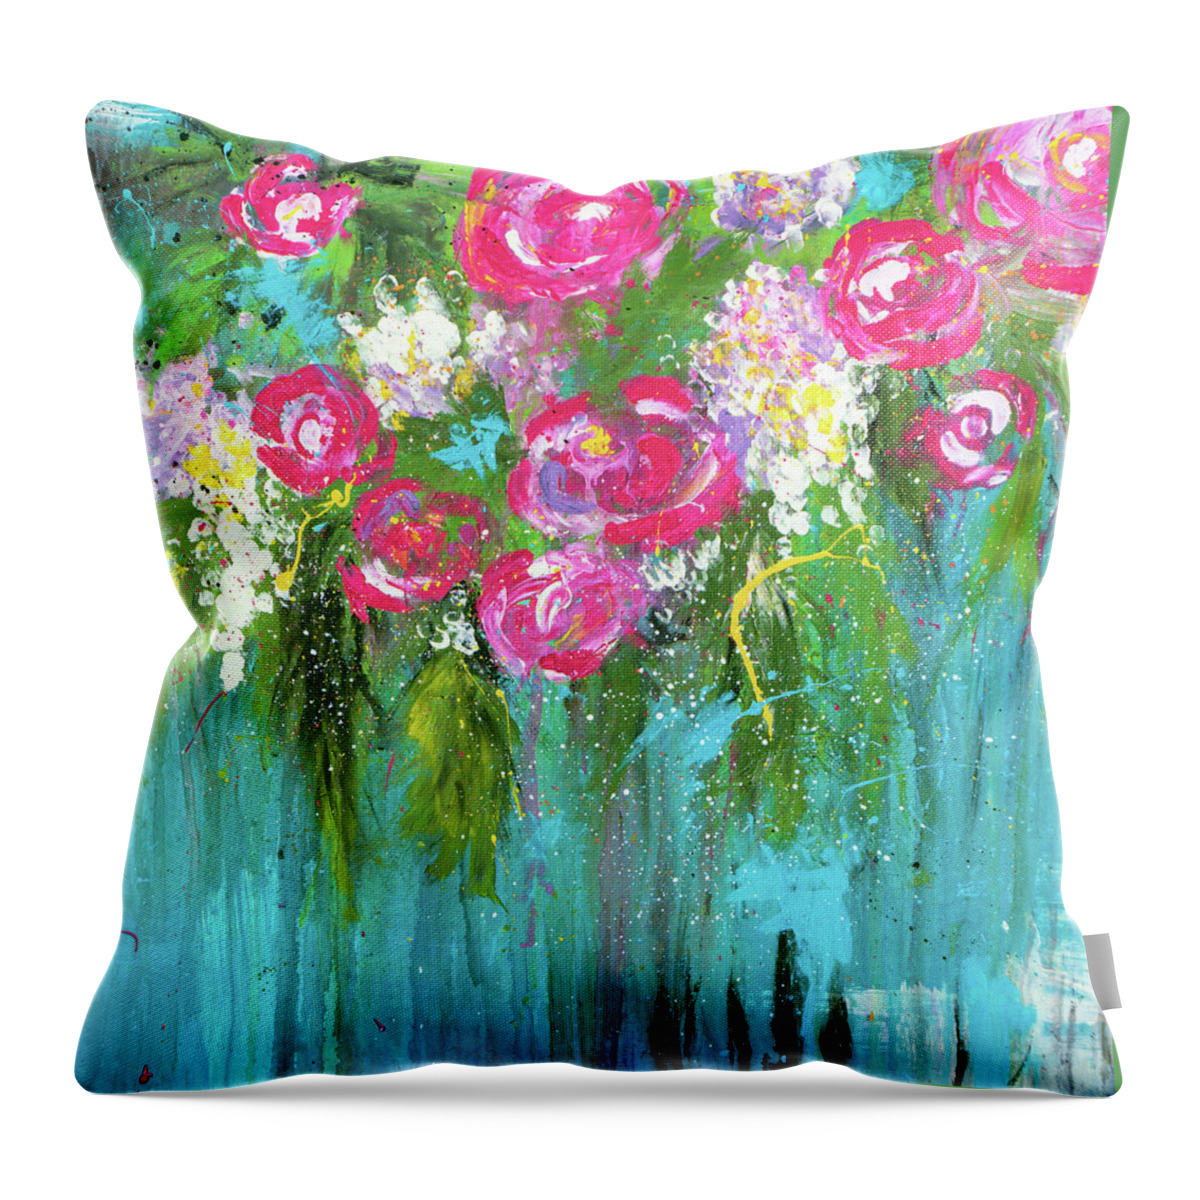 Pink Throw Pillow featuring the painting Pink Rose Bohemian Abstract Floral by Joanne Herrmann